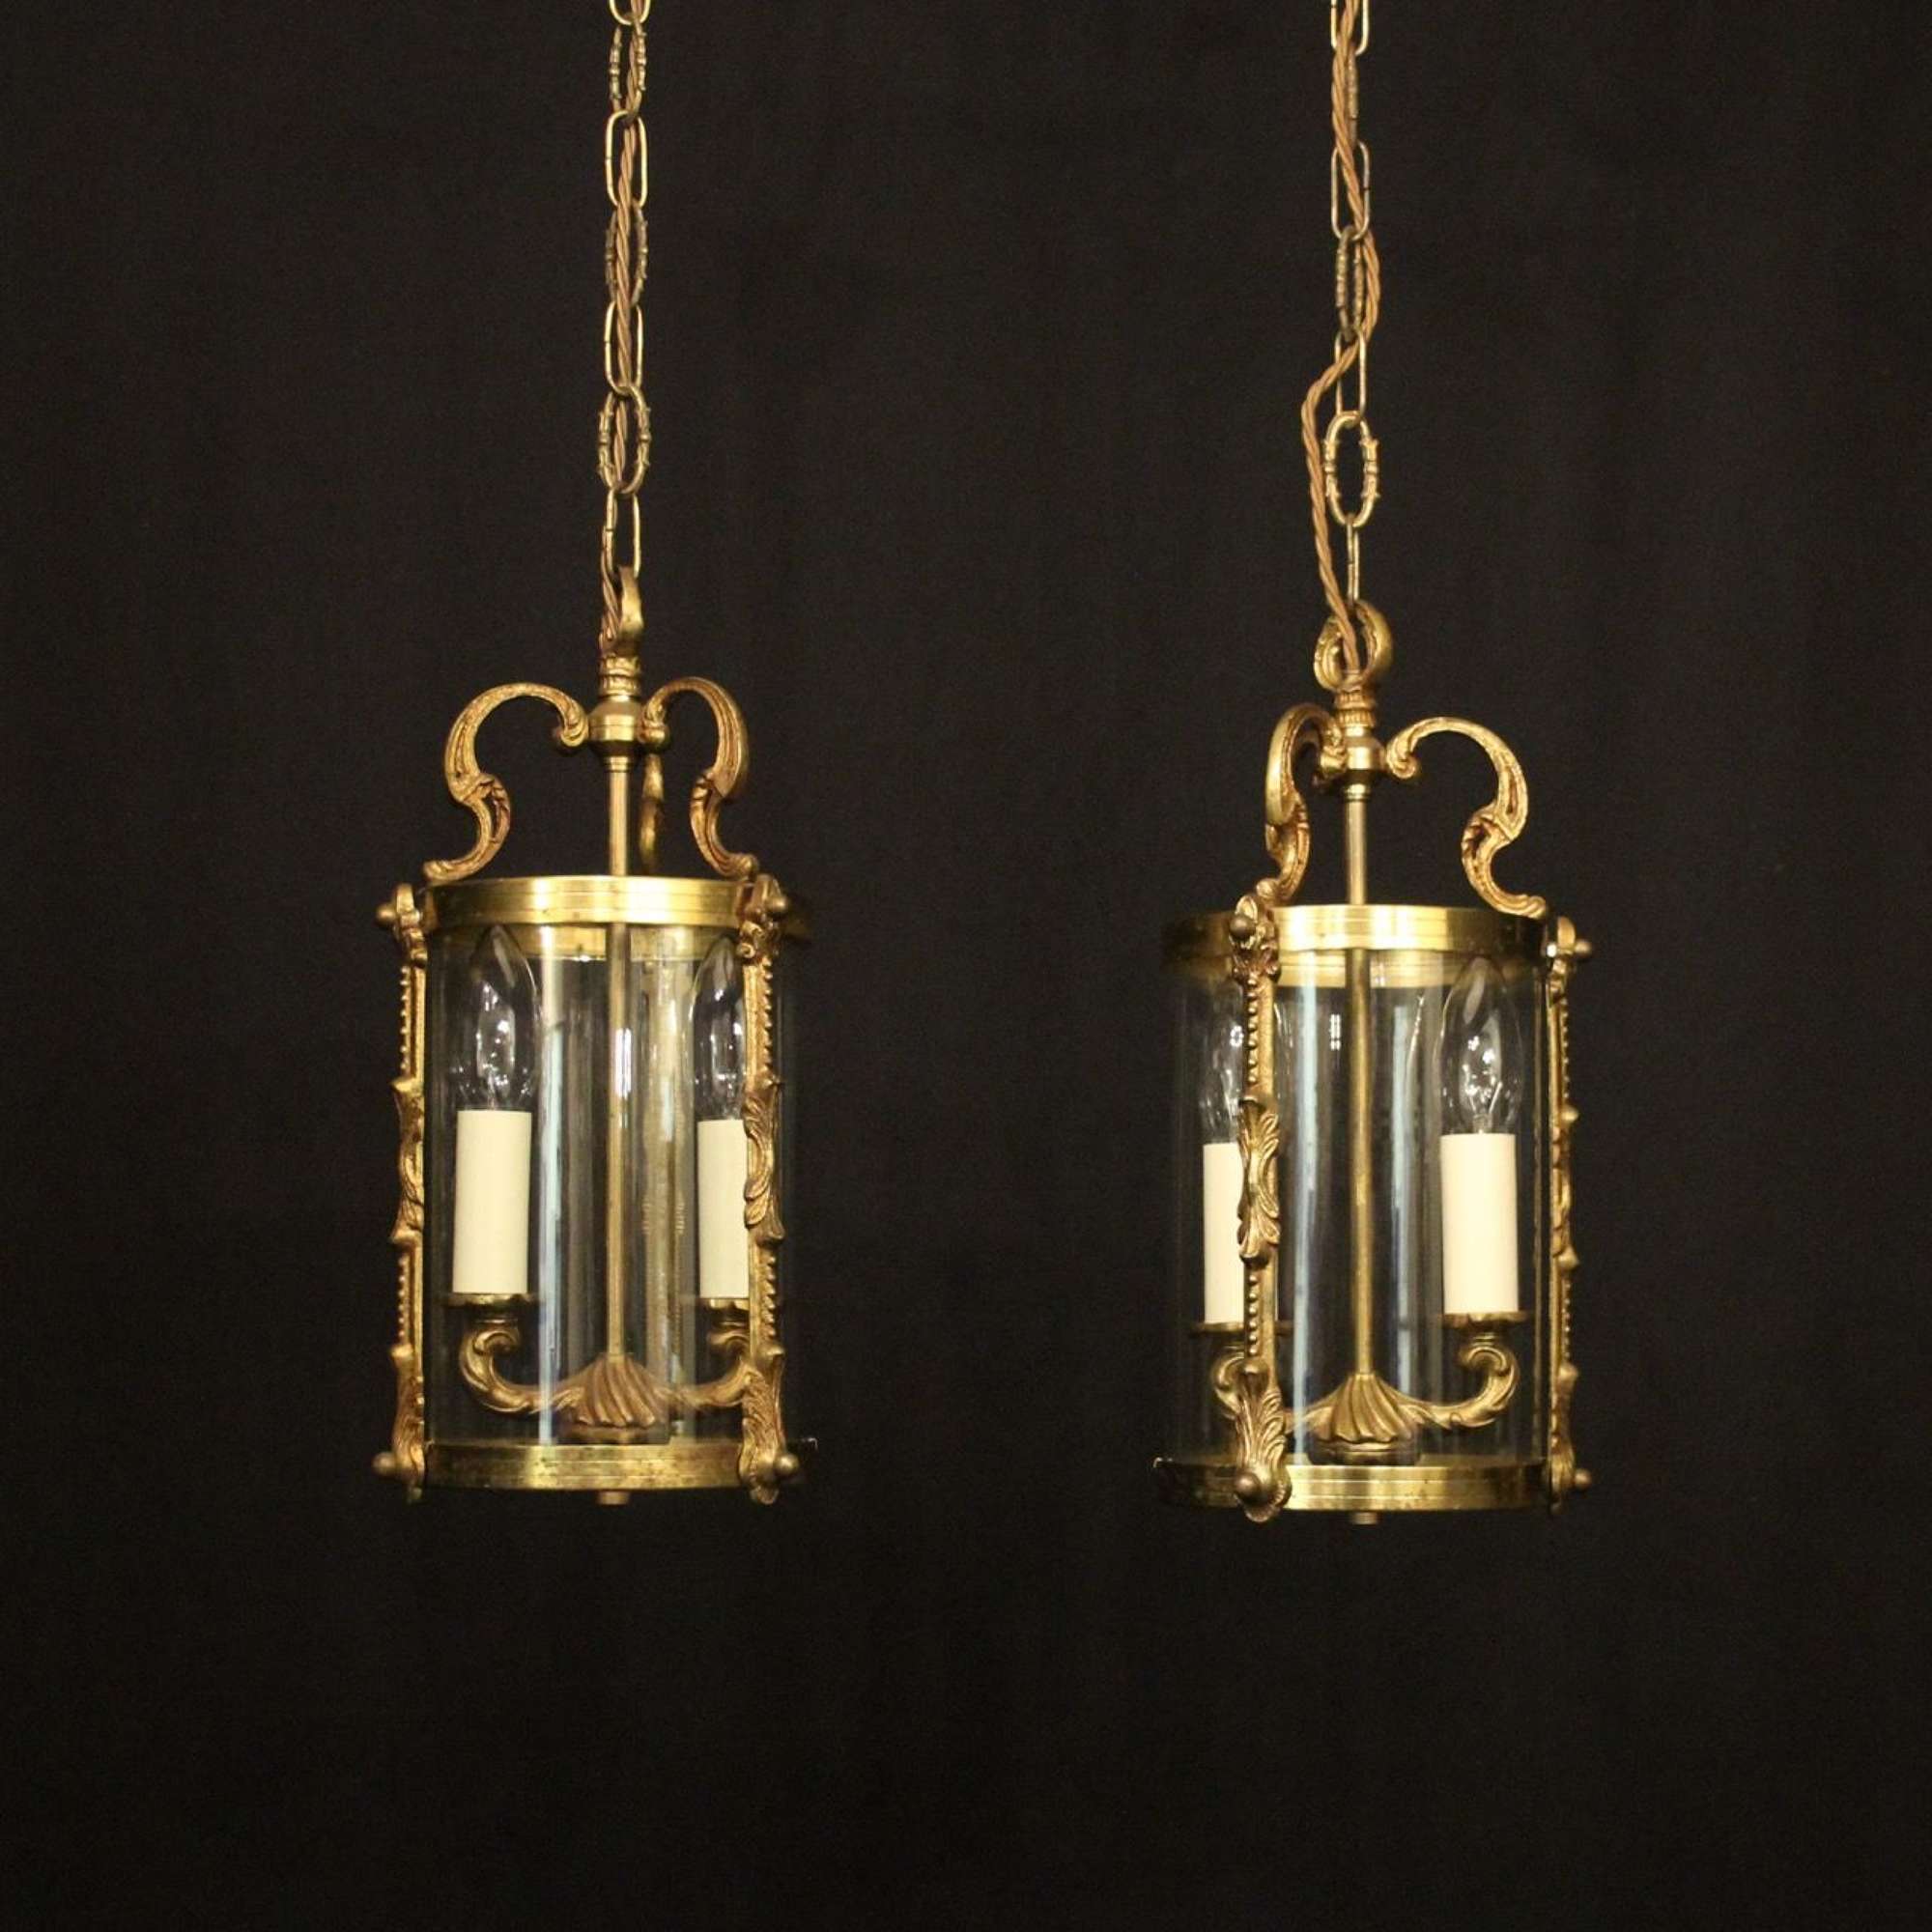 French Pair Of Gilded Brass Antique Lanterns